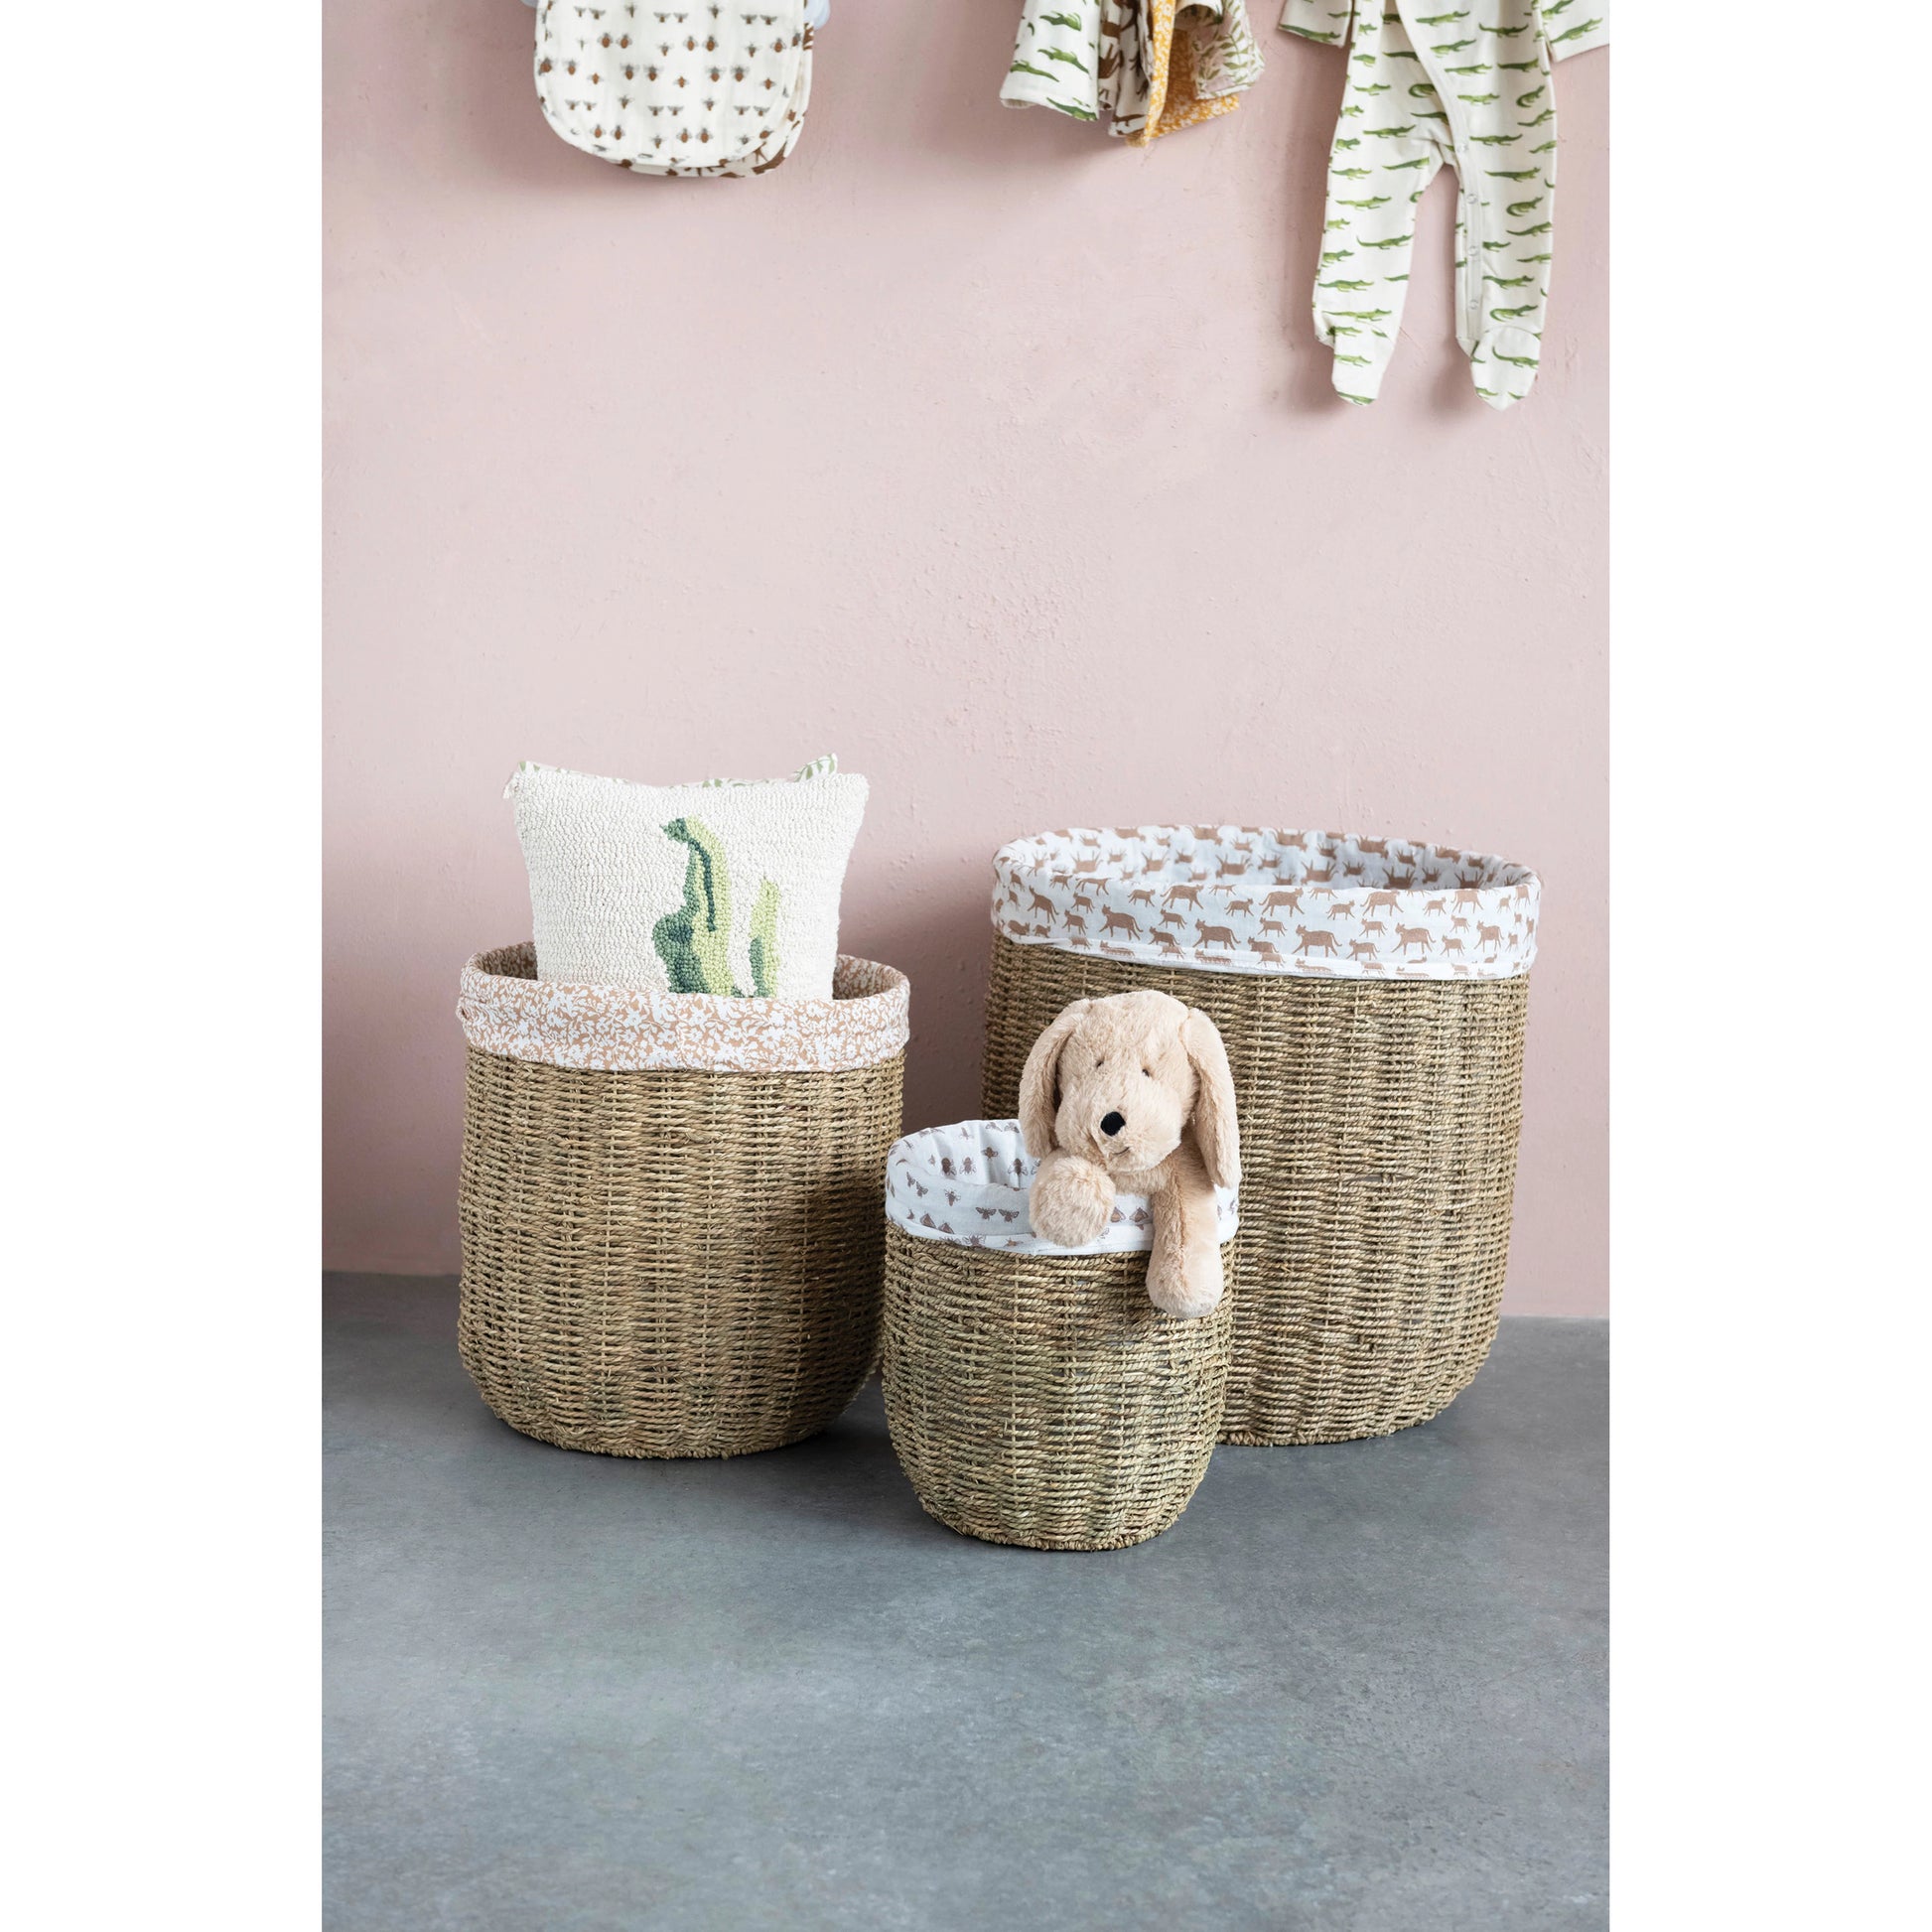 Laundry Basket w/ Patterned Lining, The Feathered Farmhouse